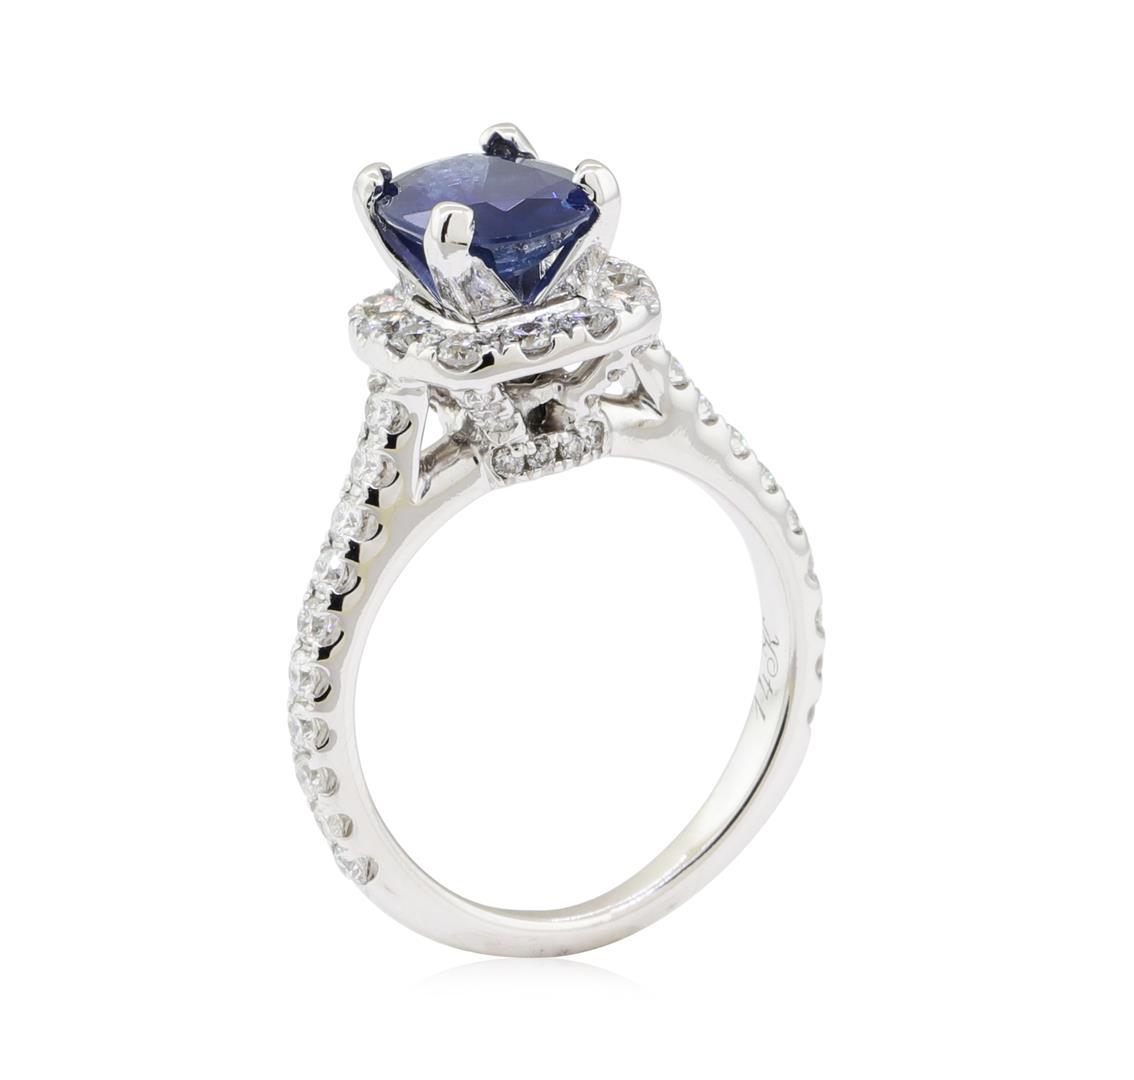 2.41 ctw Sapphire and Diamond Ring - 14KT White Gold